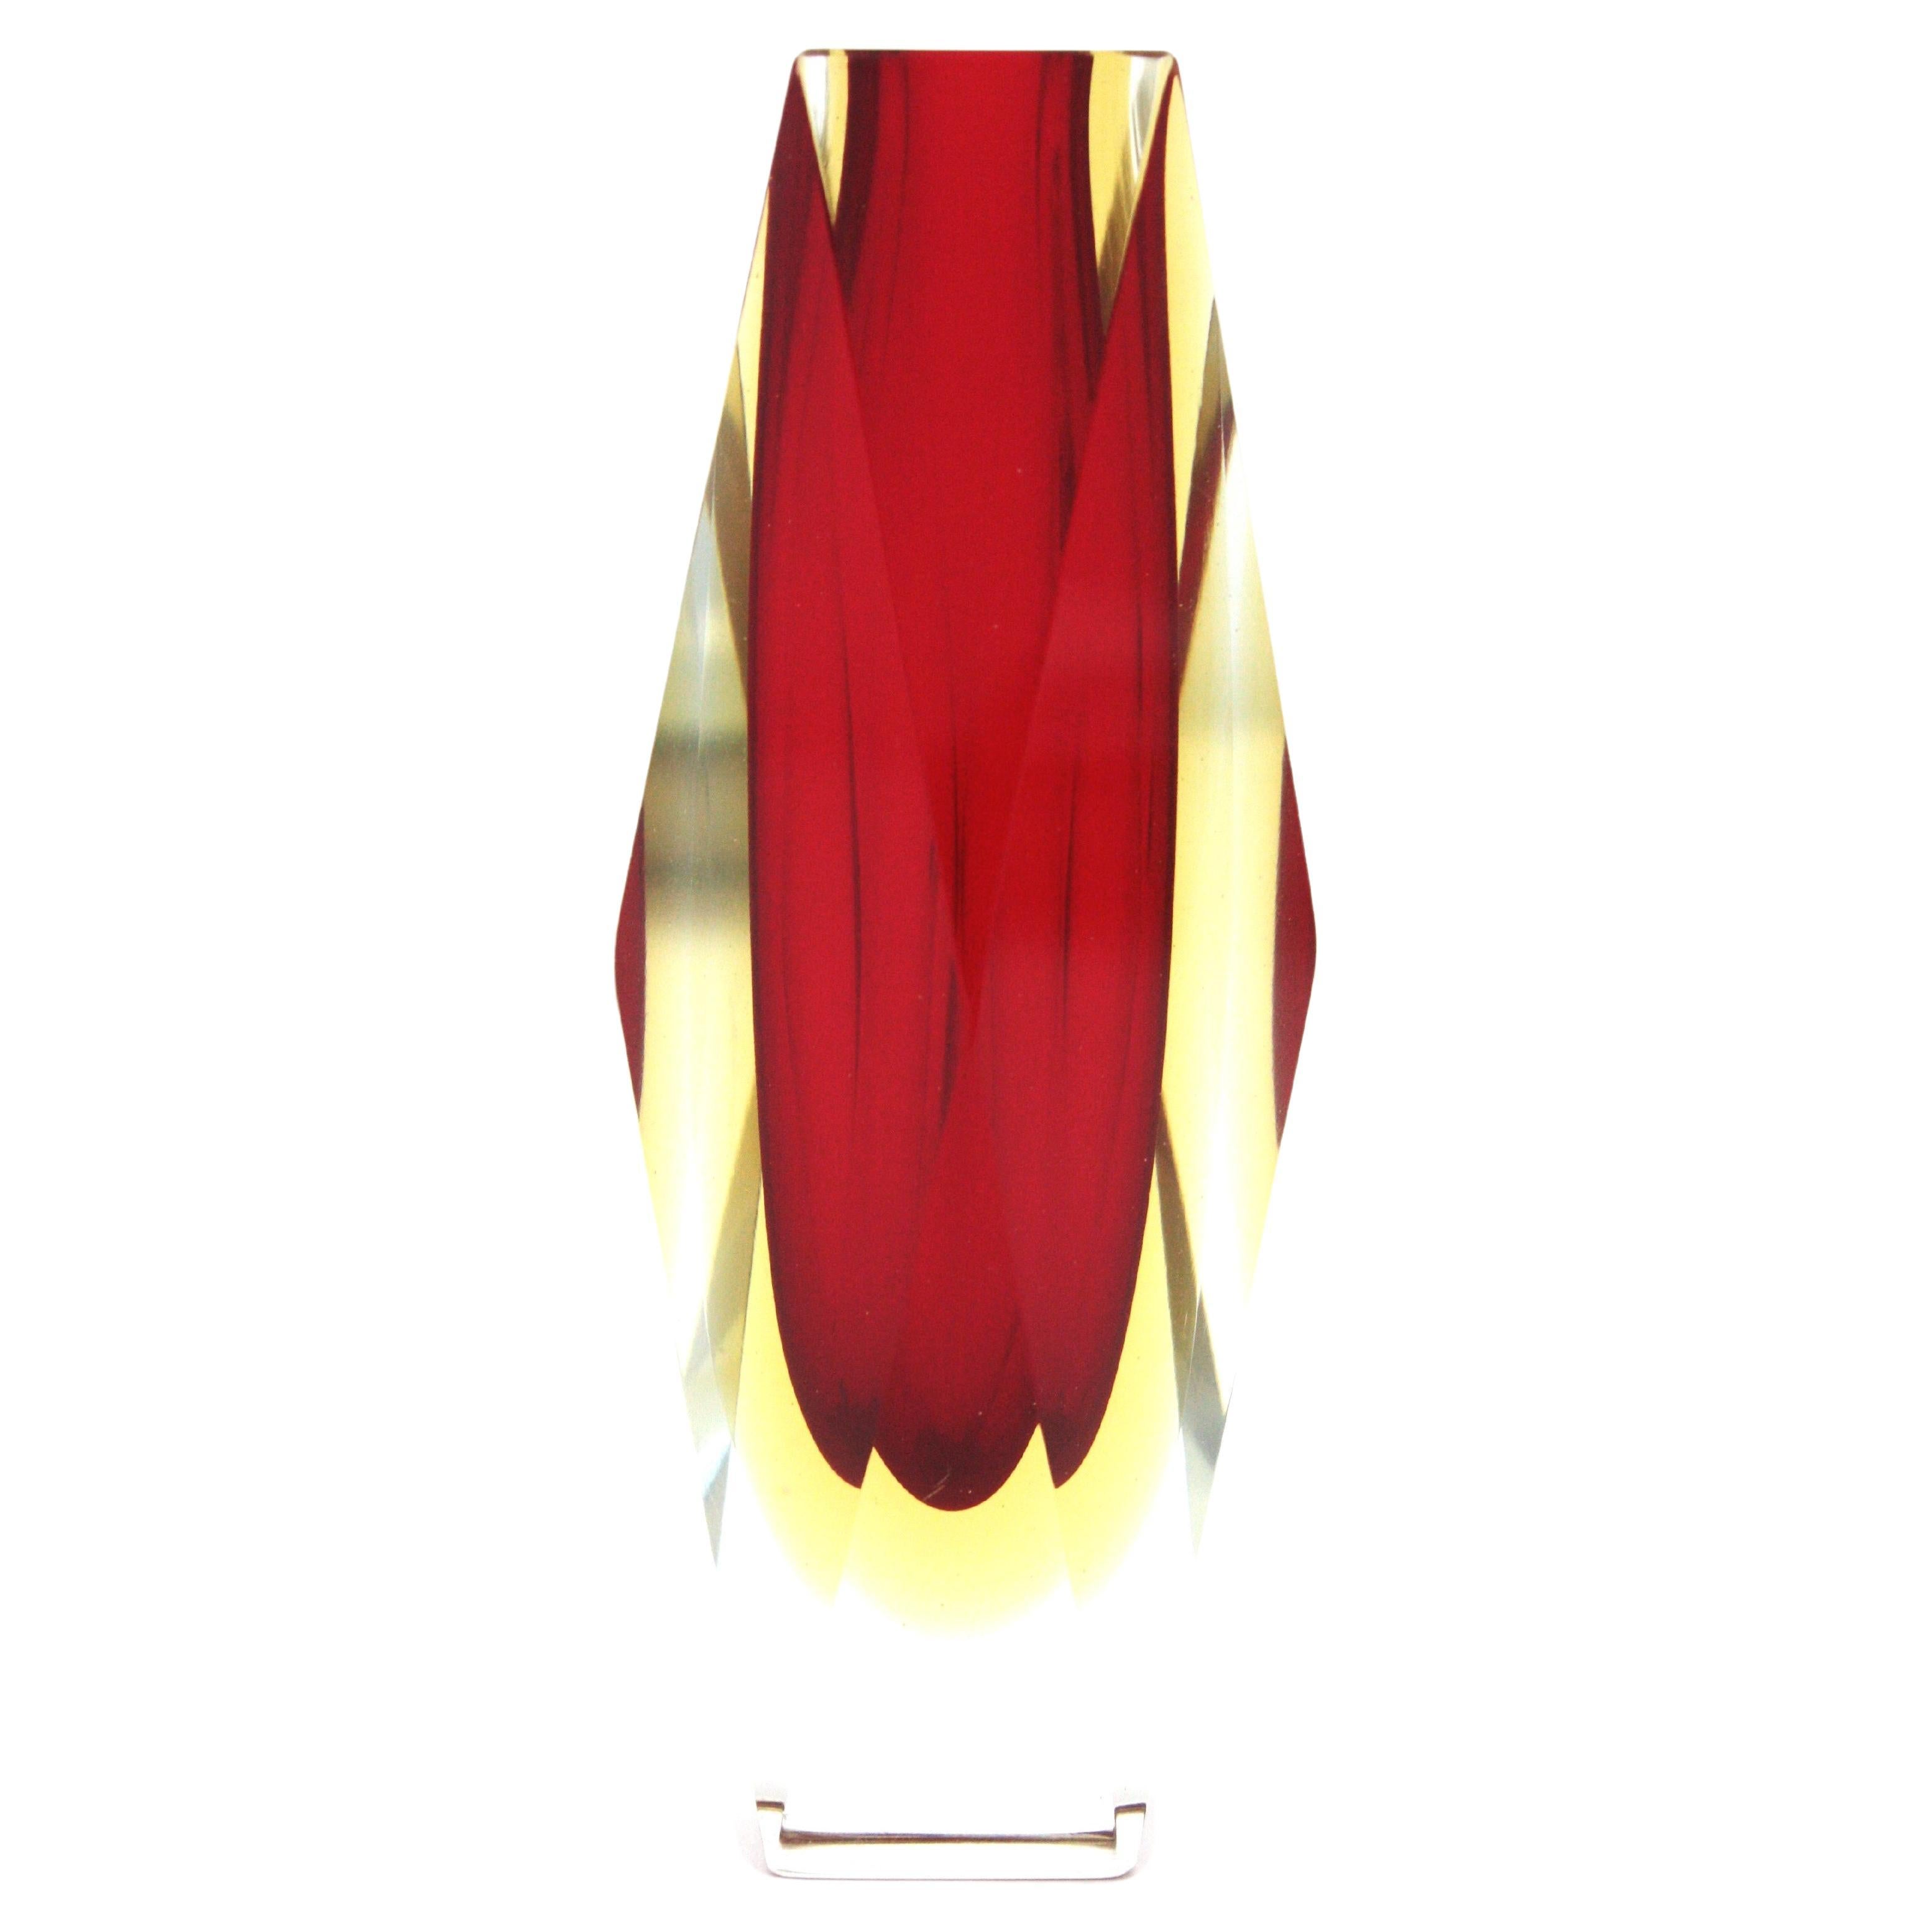 Faceted Sommerso double cased red and yellow Murano Art glass vase. Attributed to Mandruzzato, Italy, 1960s
Red glass with a layer of yellow glass cased into clear glass. The vibrant red color is eye-catching.
Beautiful to be used as flower vase or